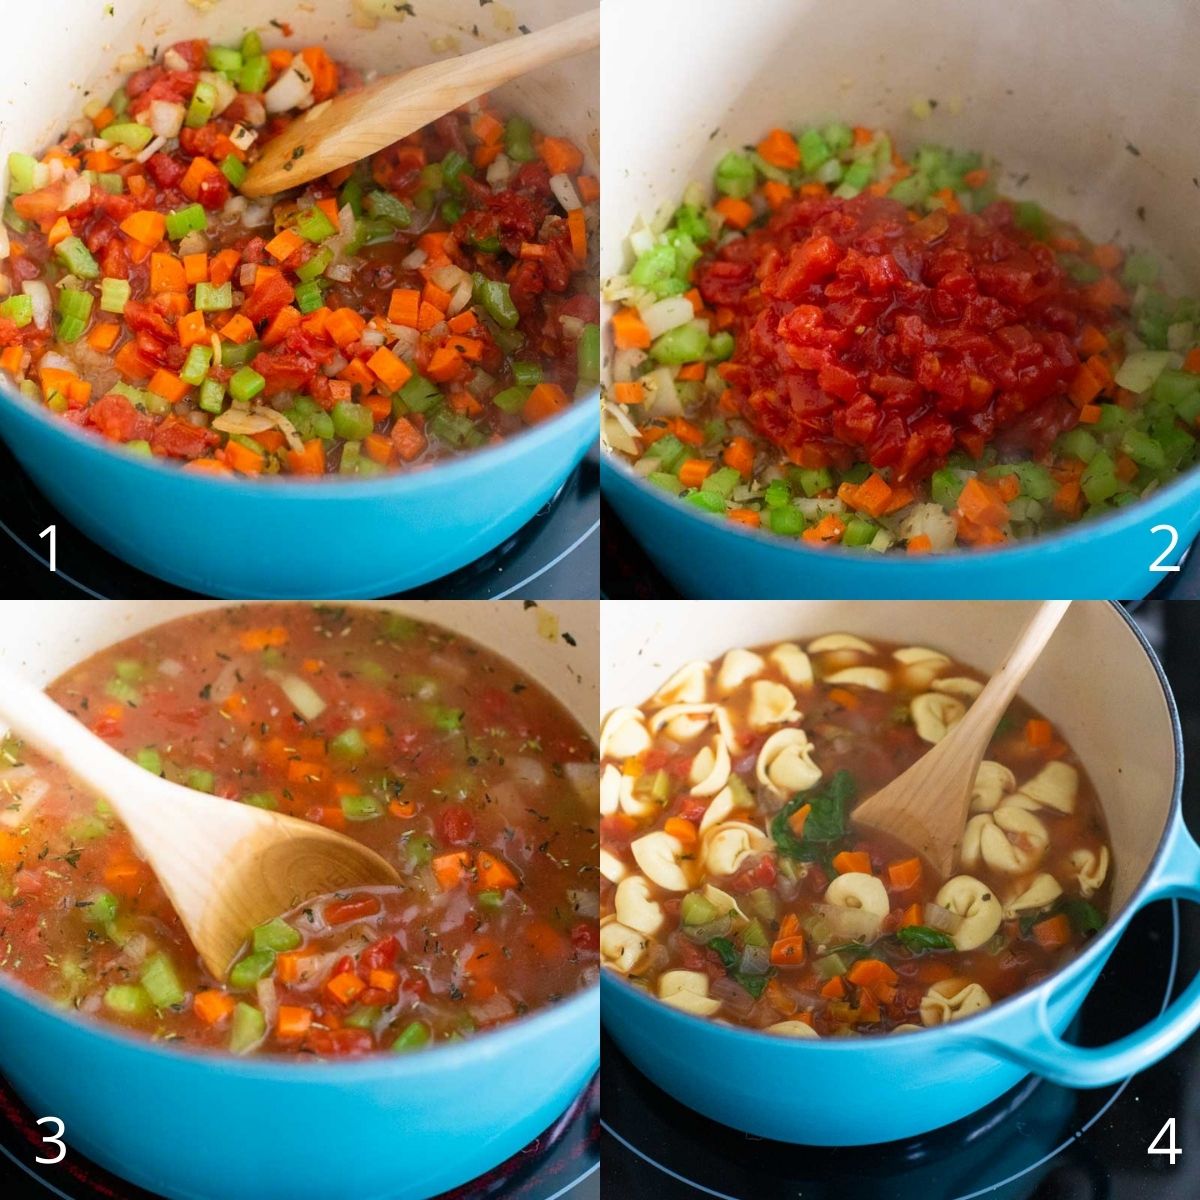 Step by step photos show how to build the tomato based broth for the tortellini soup.